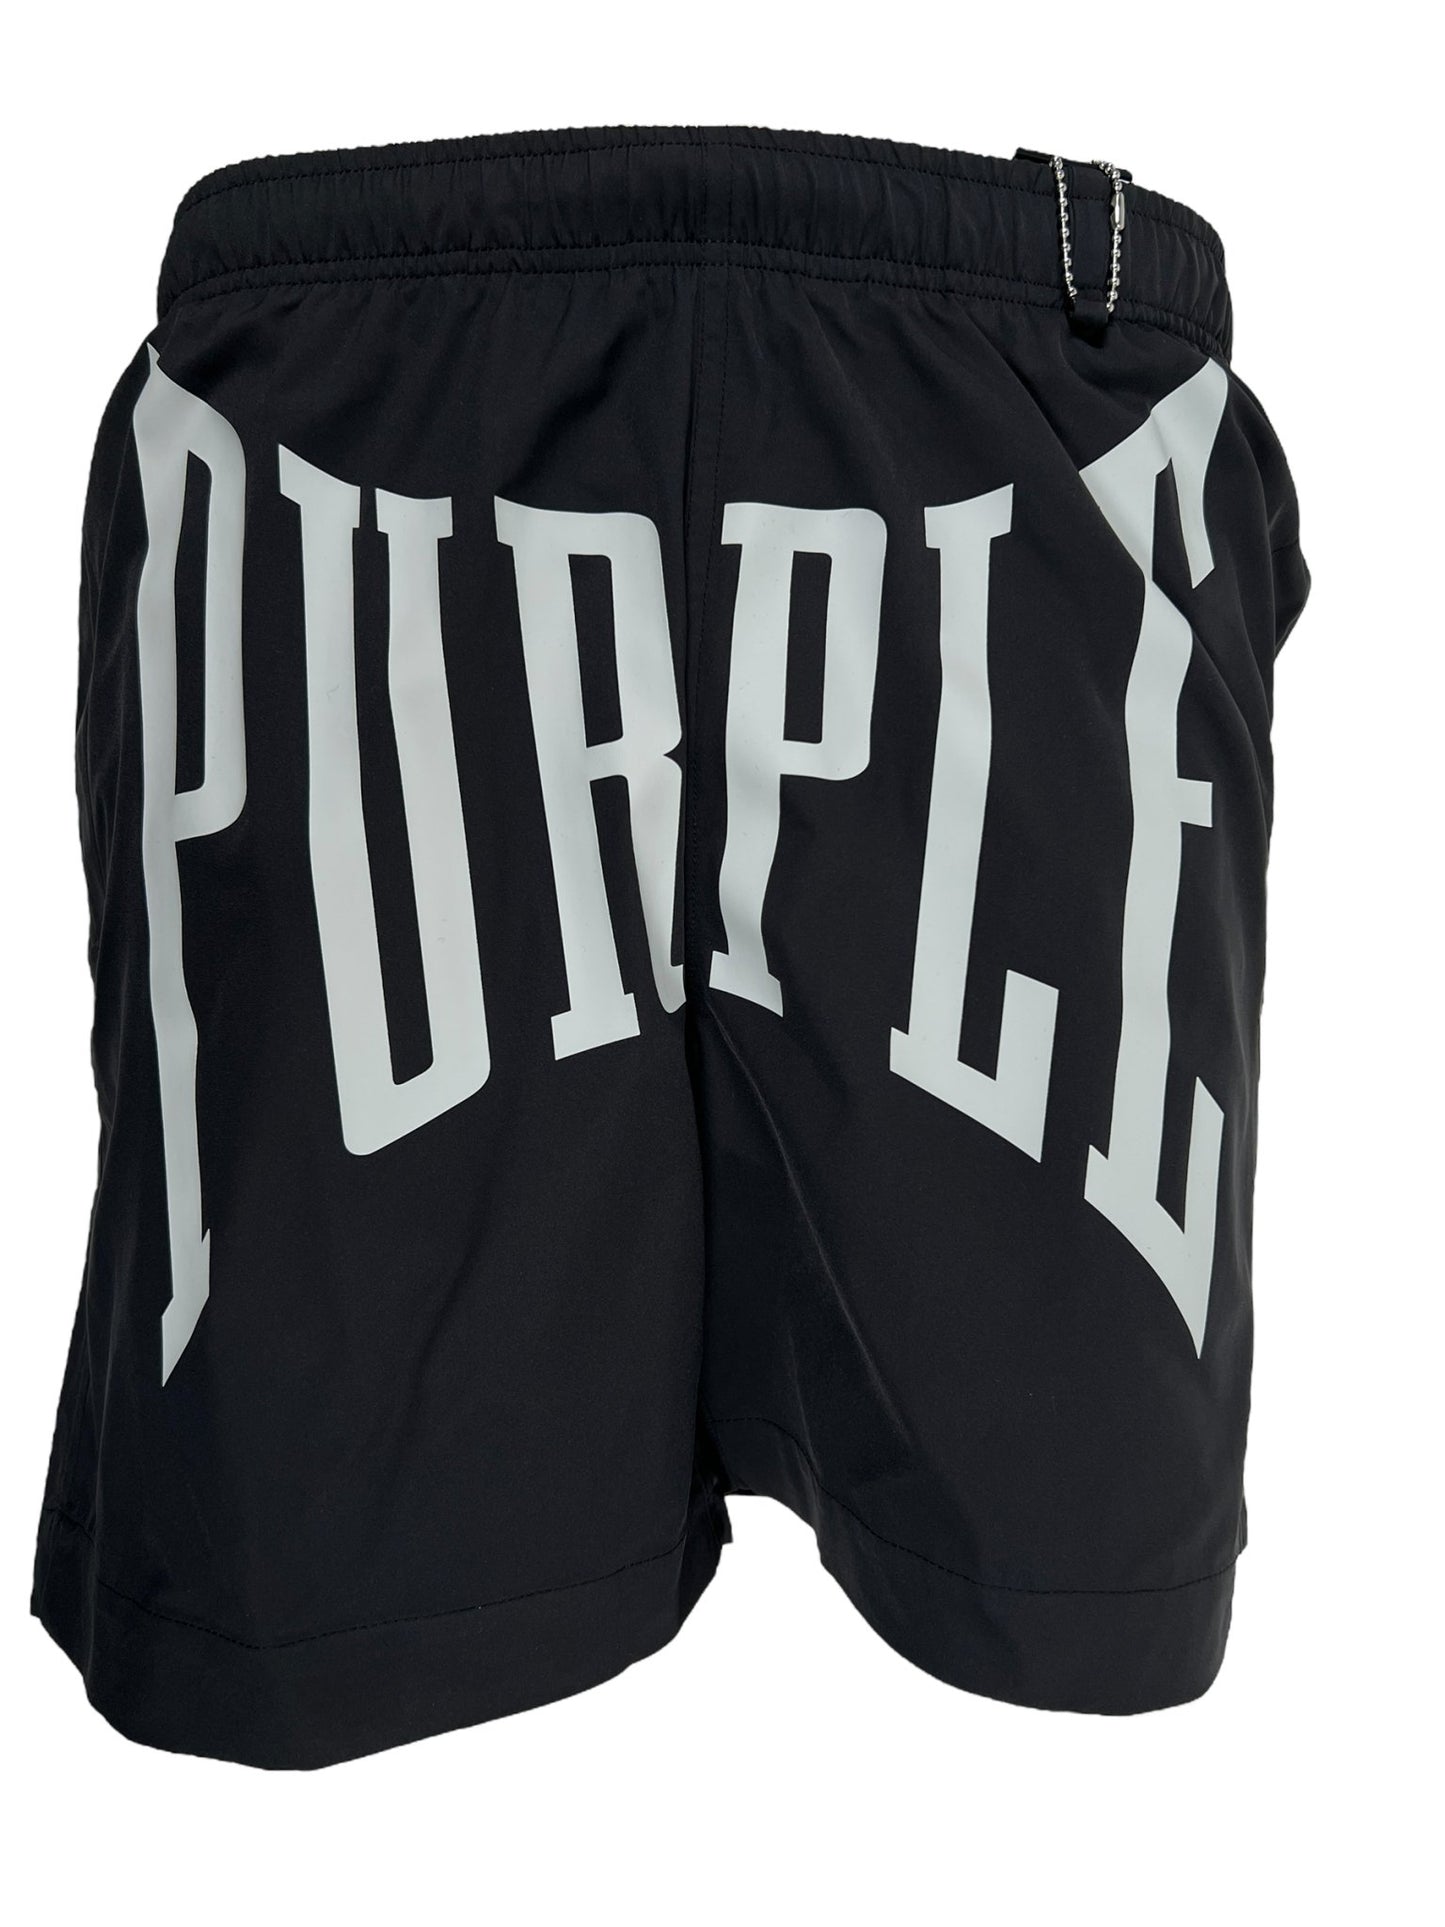 Black PURPLE BRAND Polyester swim trunks with the word "purple" printed in white letters.